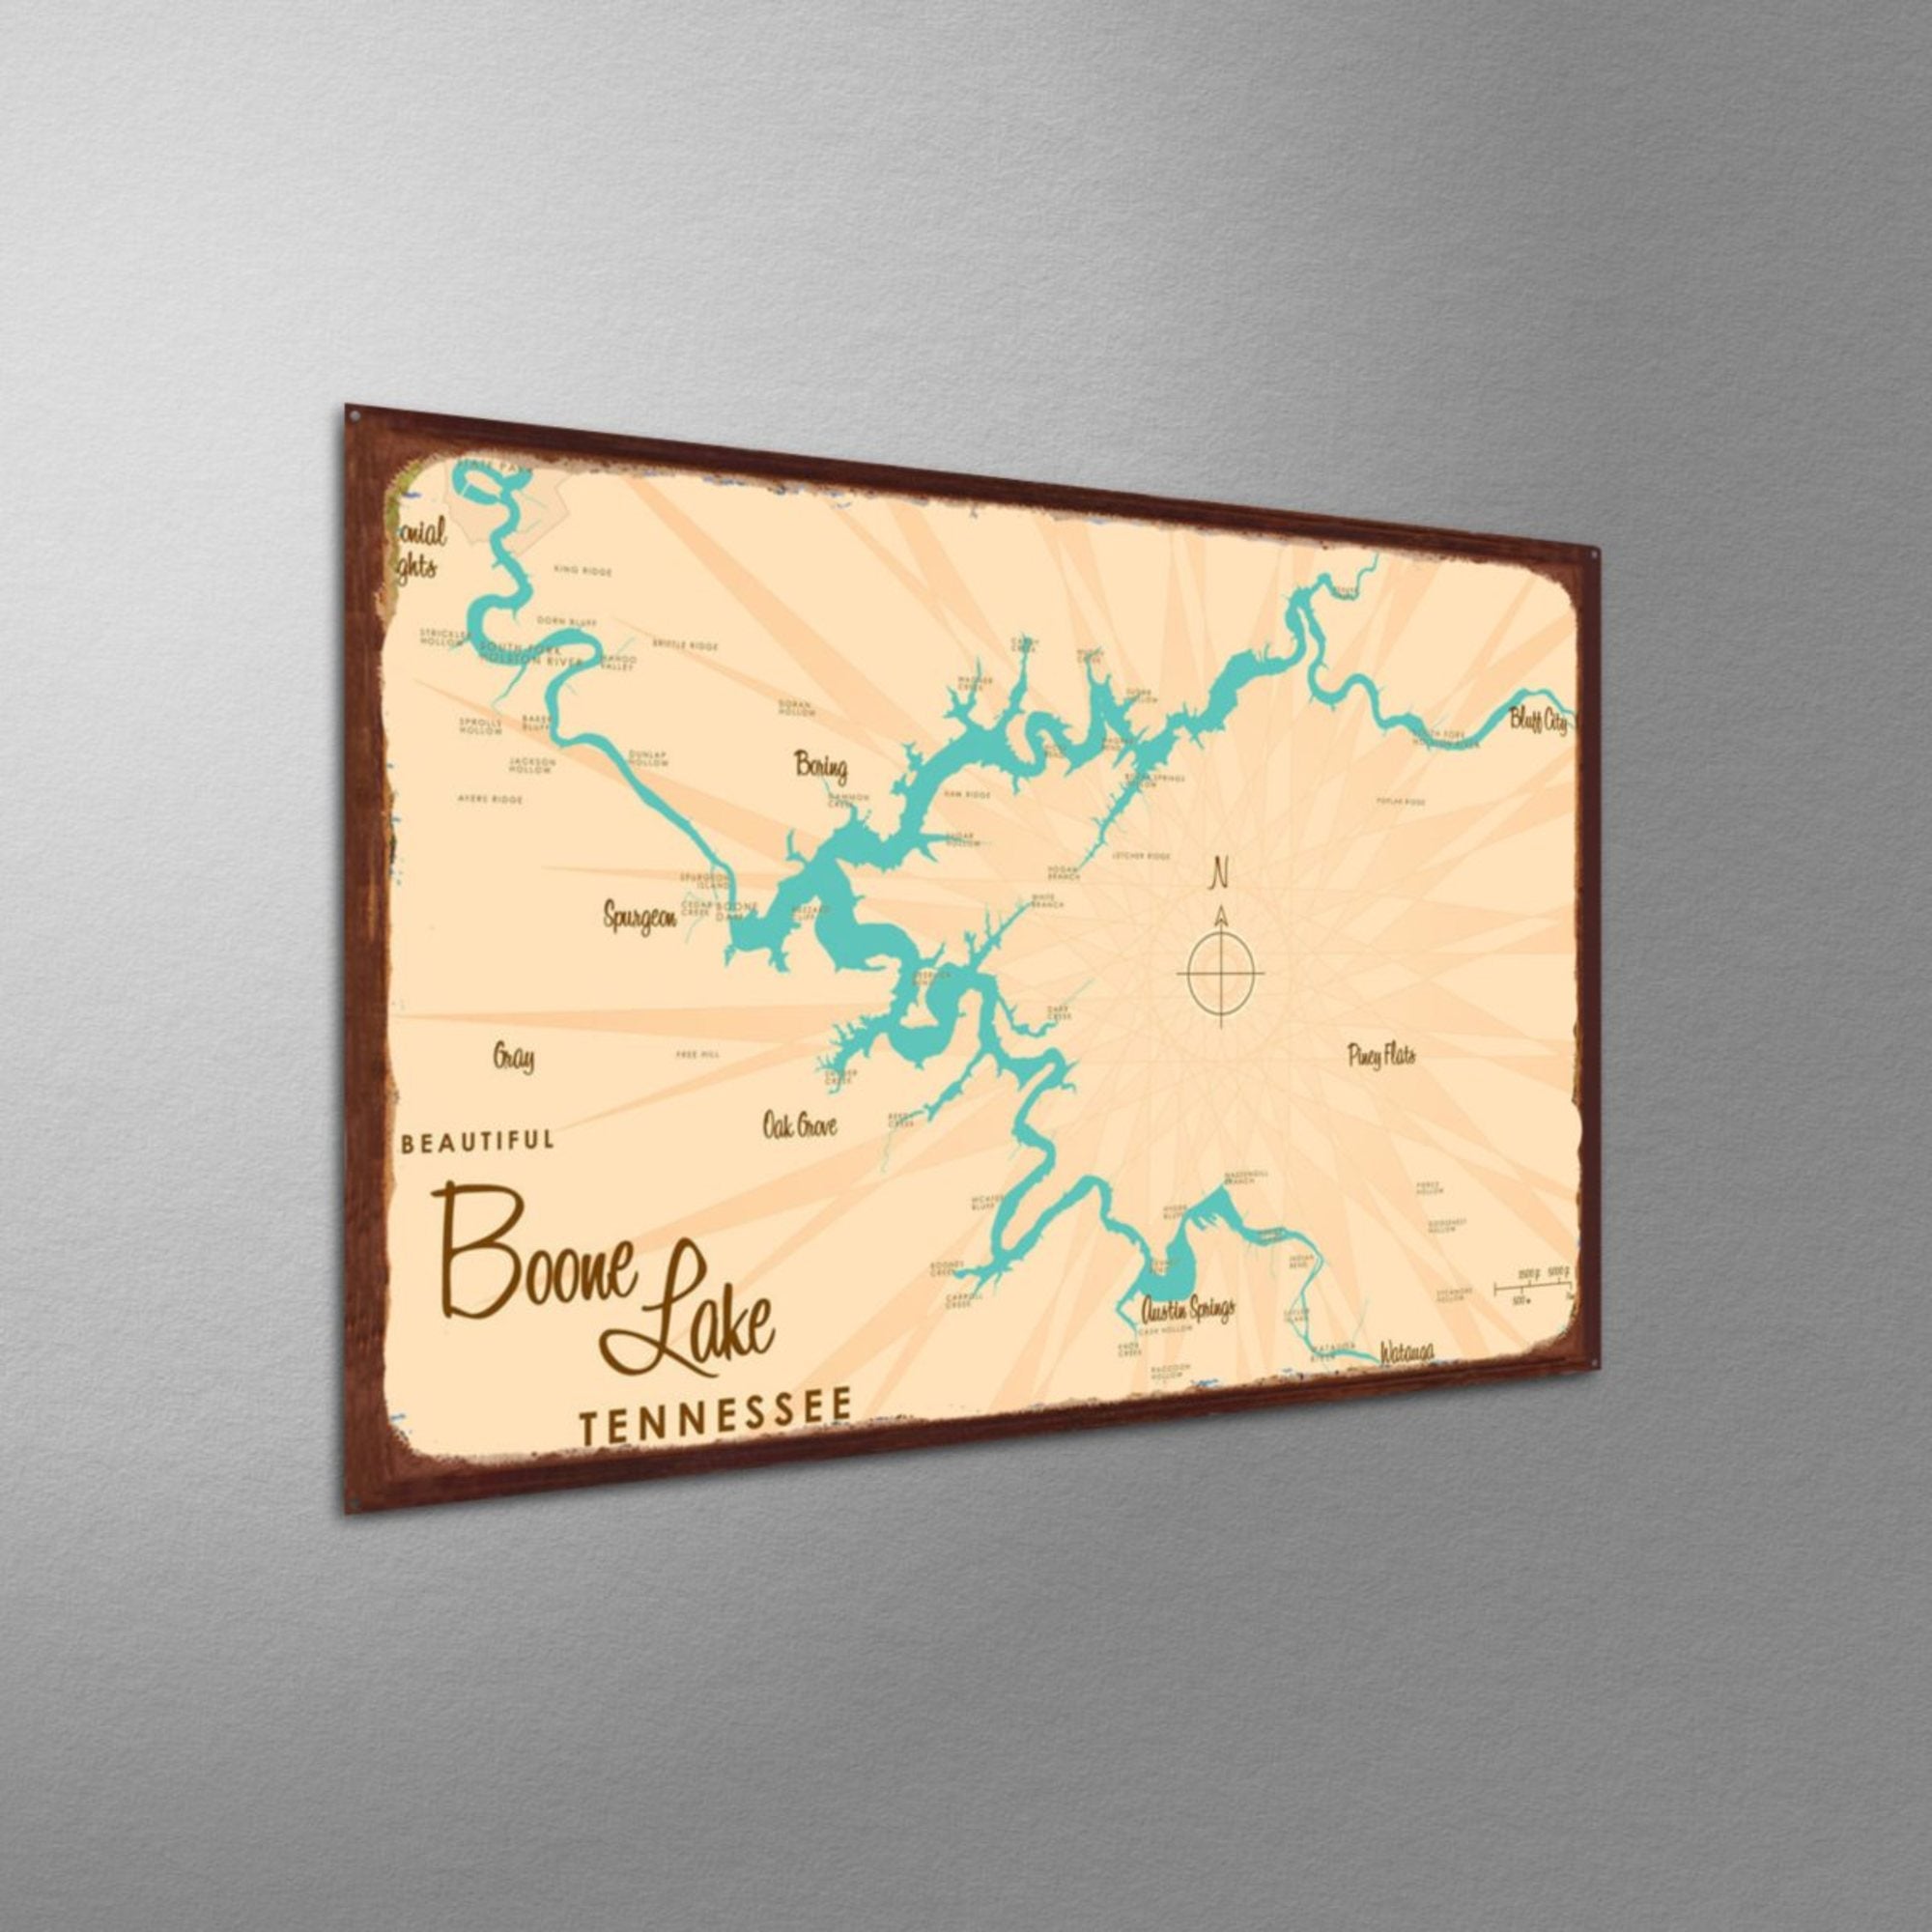 Boone Lake Tennessee, Rustic Metal Sign Map Art